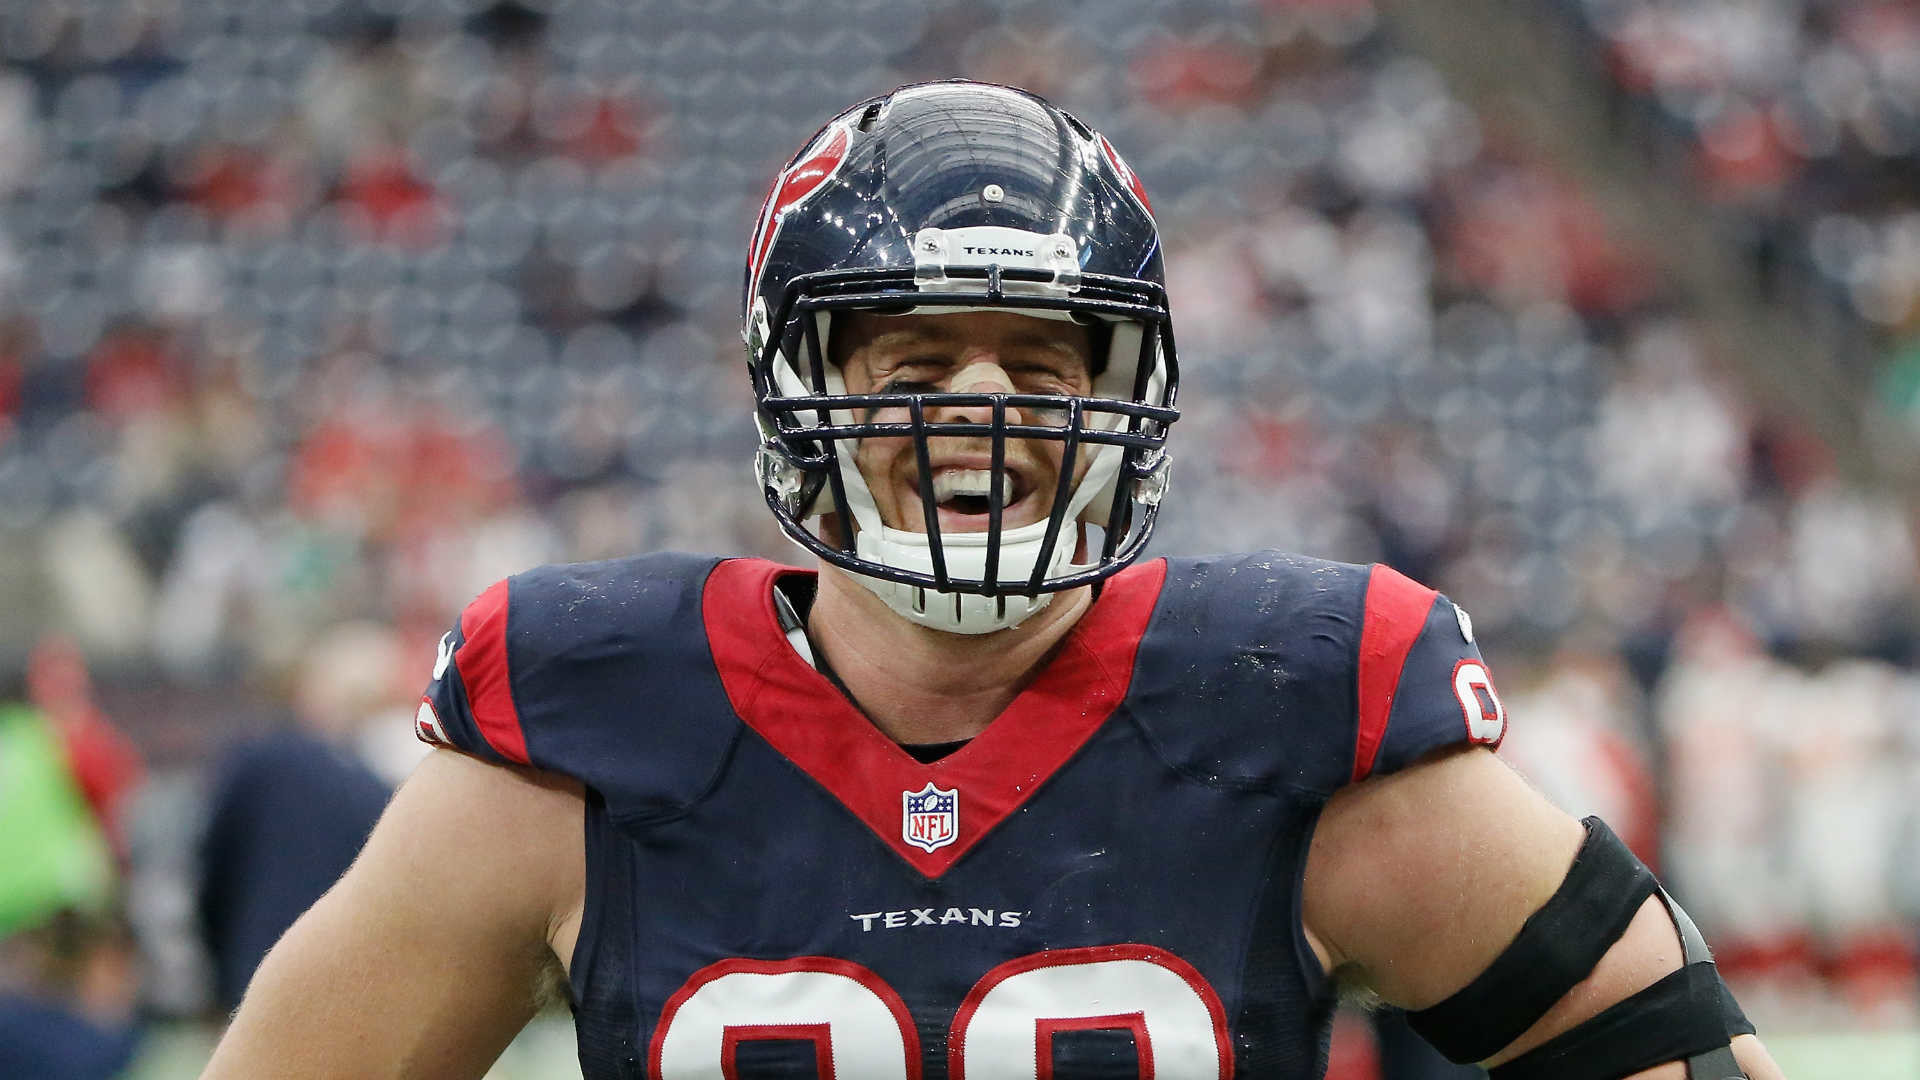 1920x1080 J.J. Watt wants to line up at FB, run over brother T.J. in Texans-Steelers  game | NFL | Sporting News